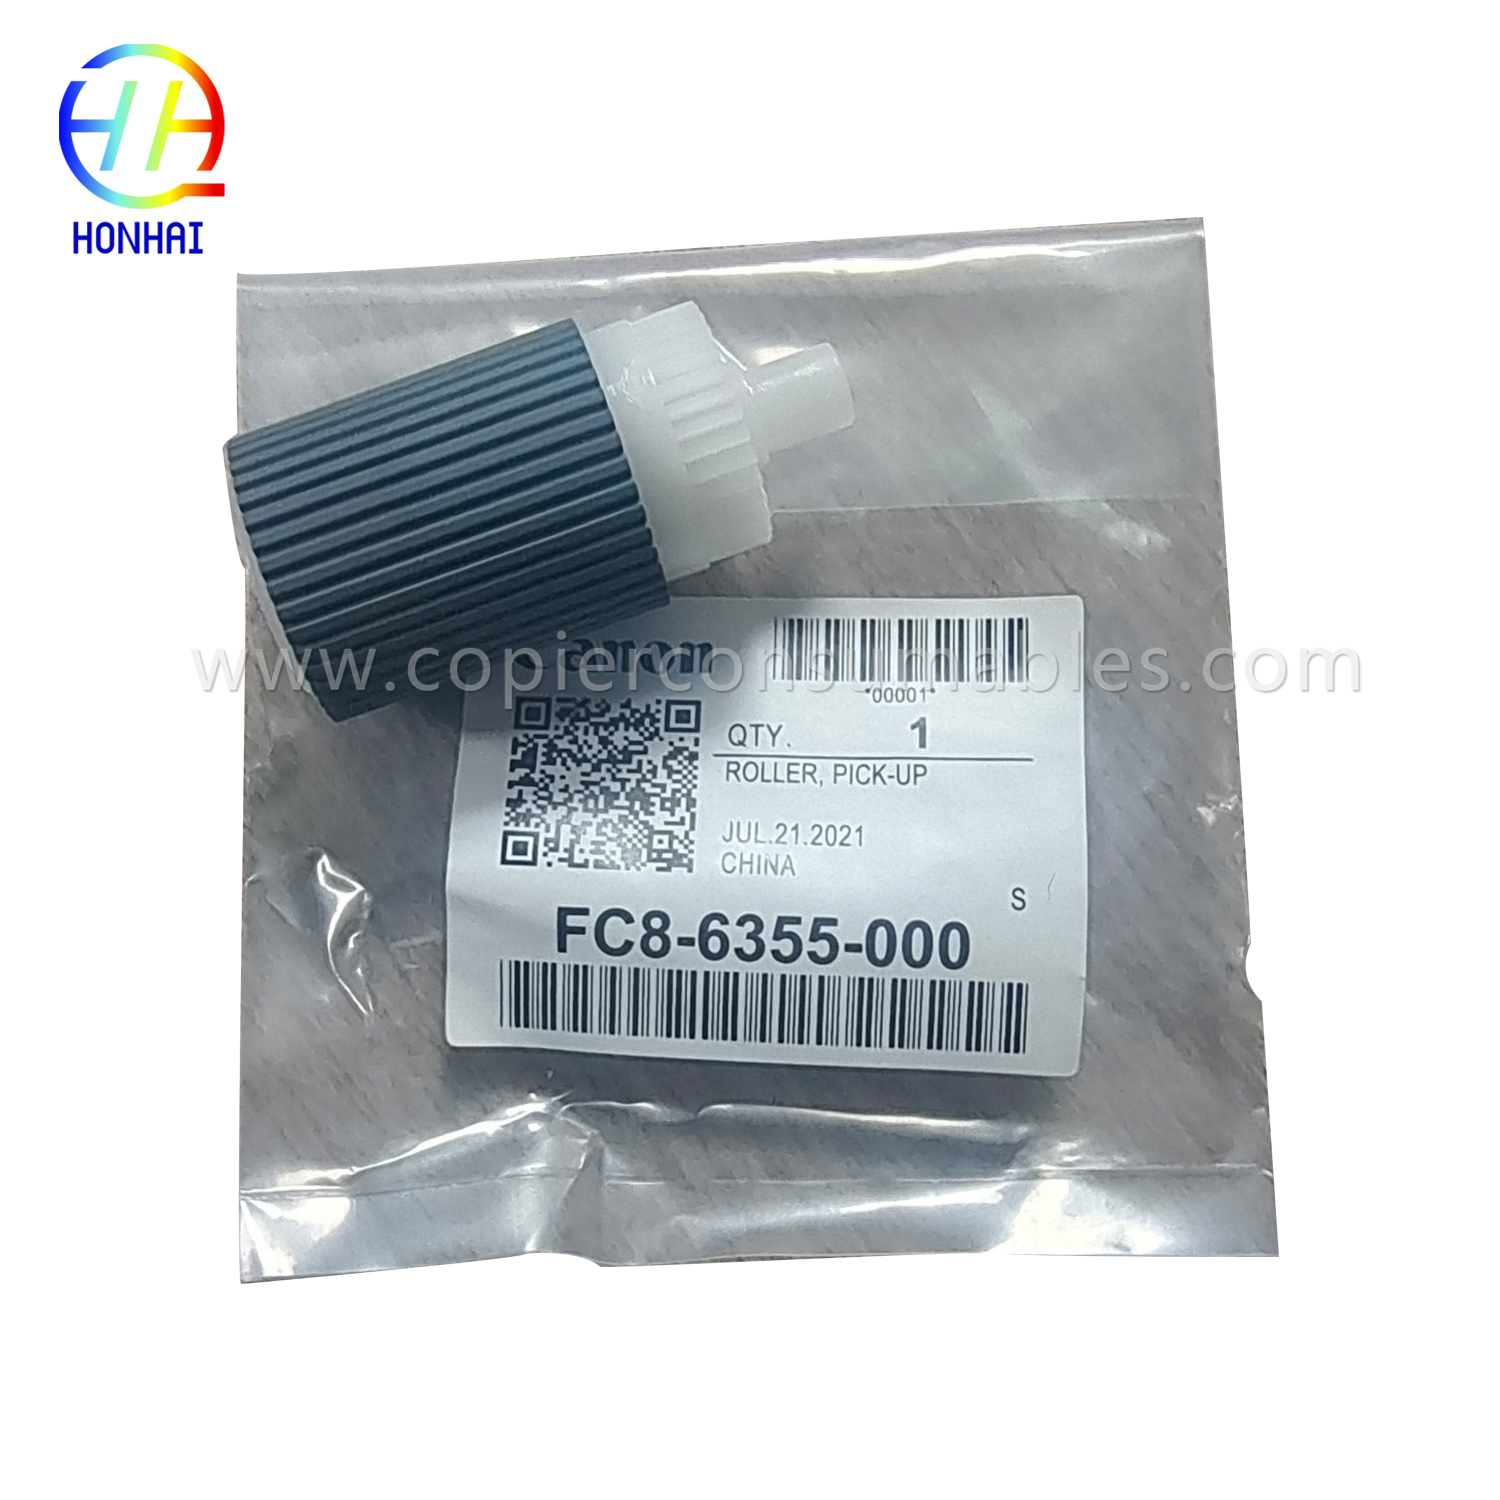 Pickup Roller for Canon Imagerunner Advance 4025 4035 4045 4051 4225 4235 4245 4251 400if 500if C2020 C2030 FC86355000 FC8-6355-0